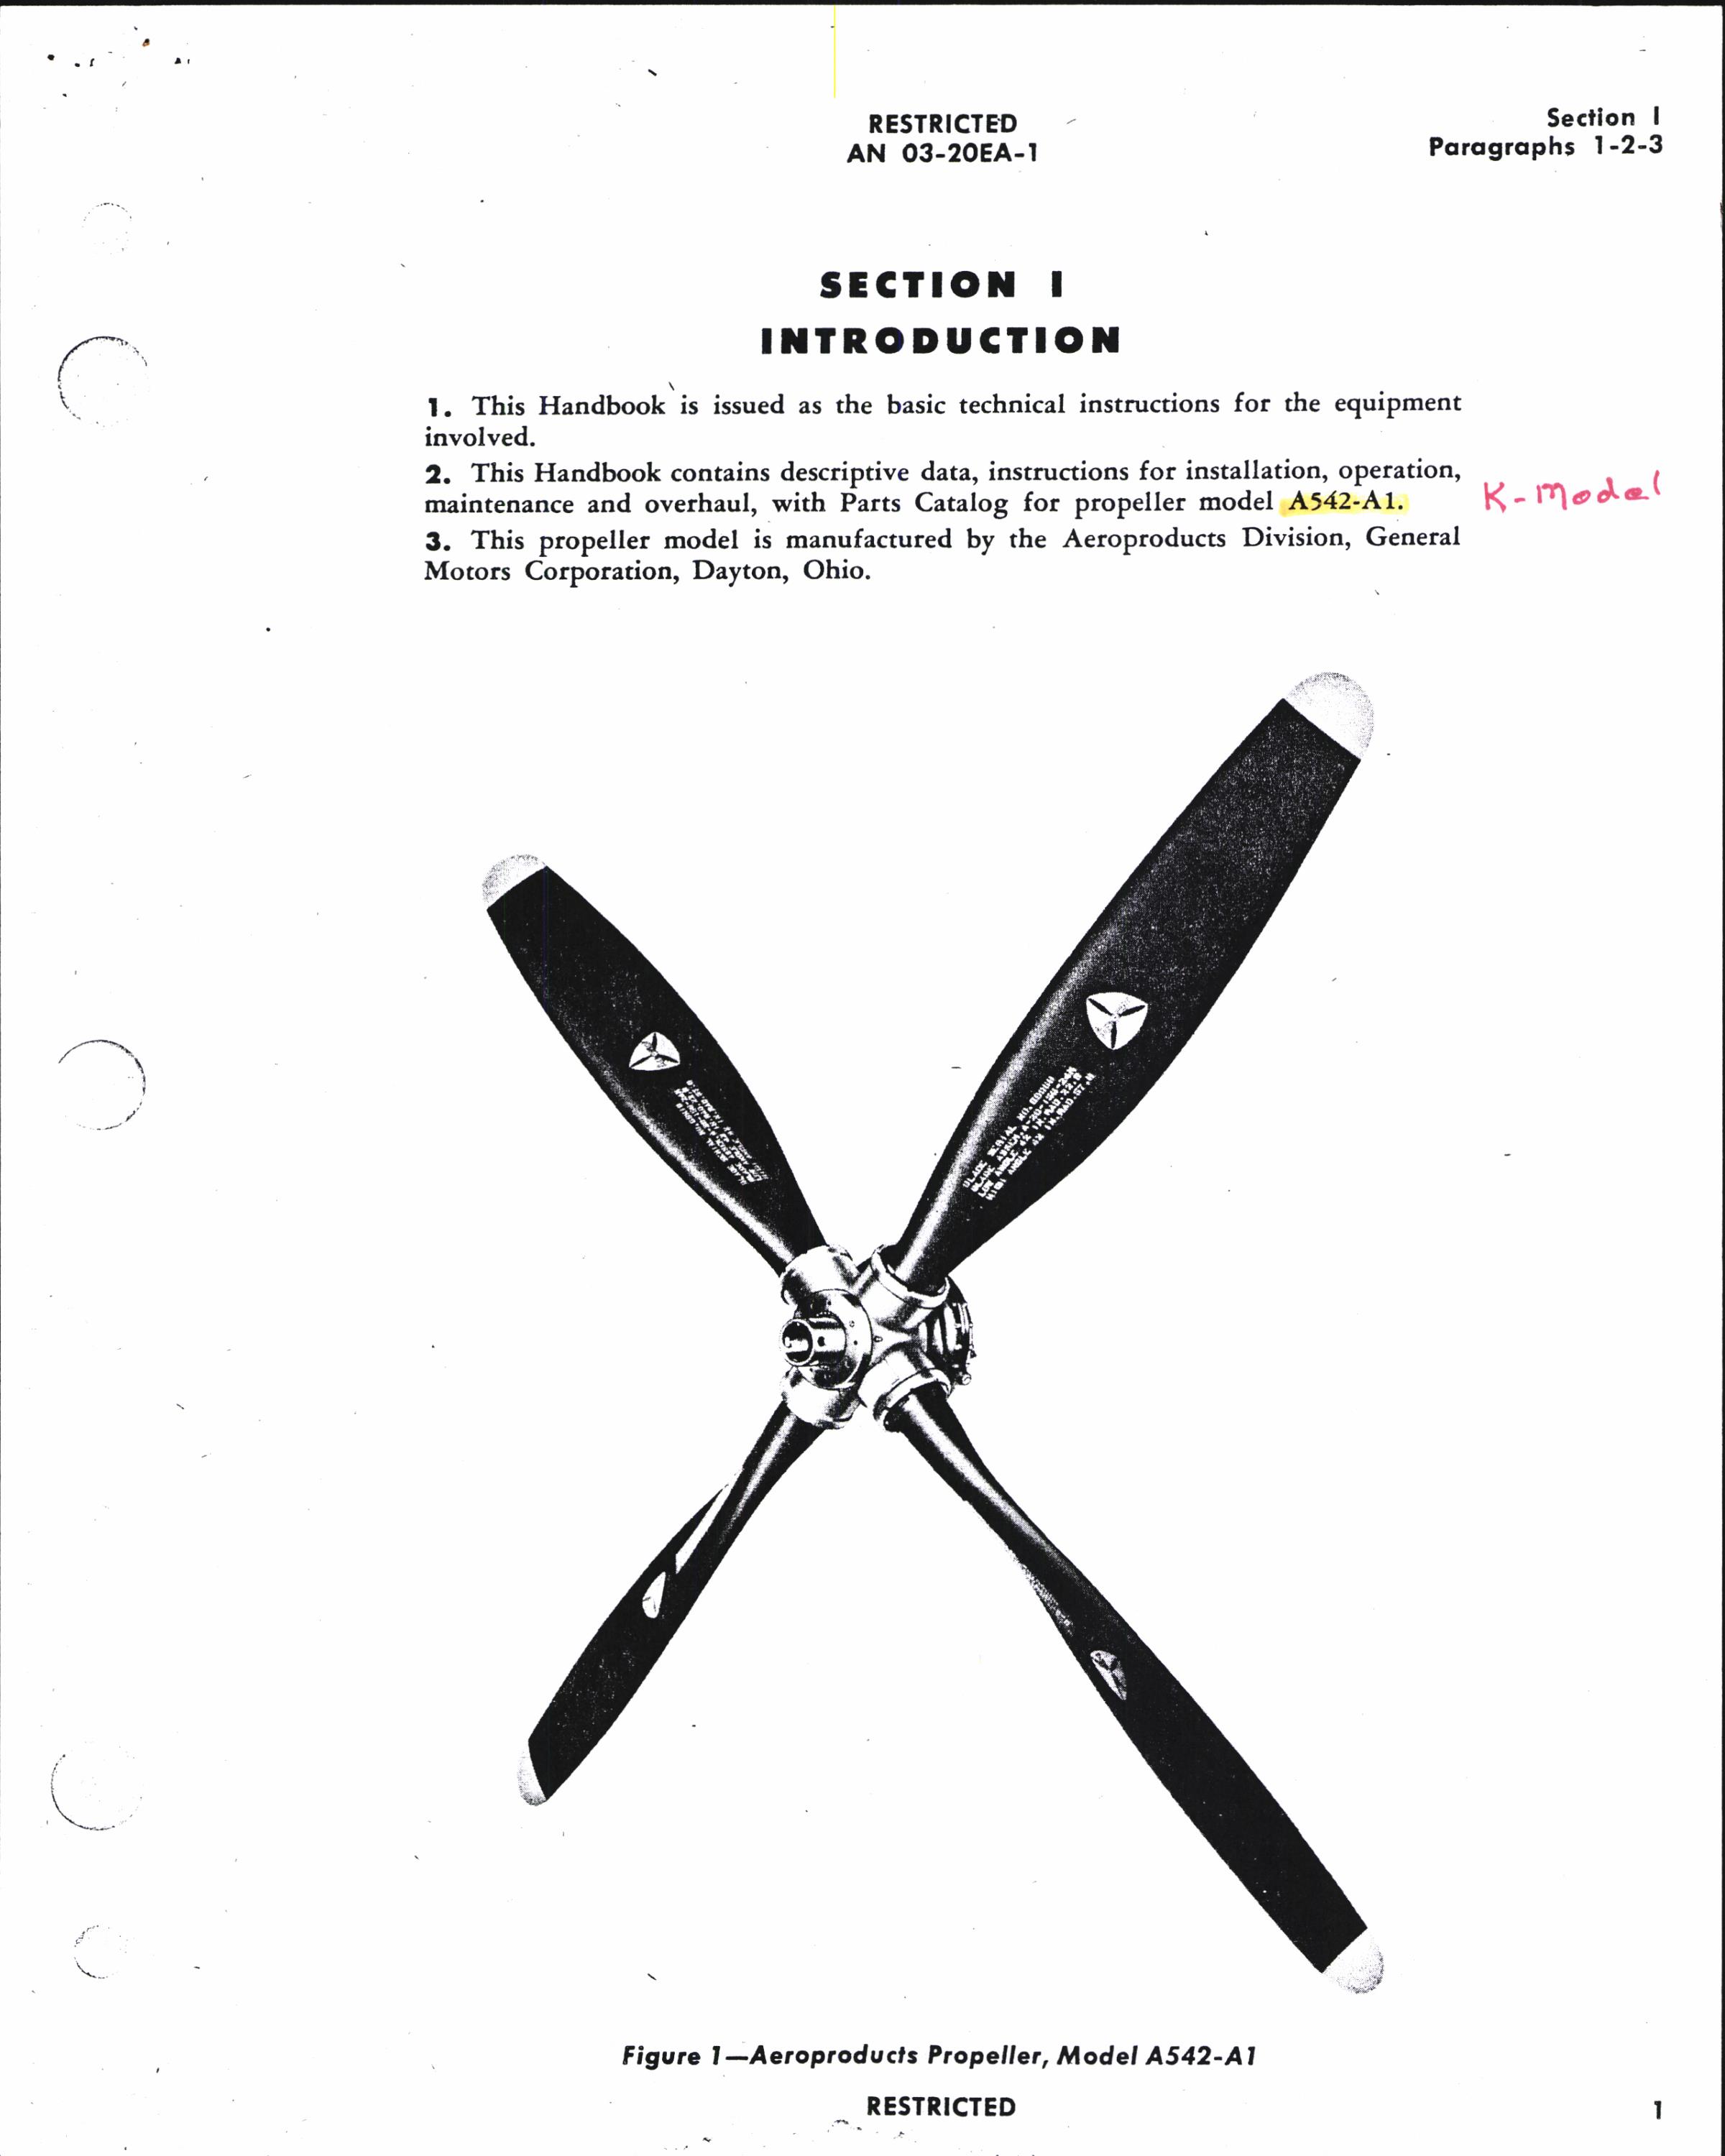 Sample page 3 from AirCorps Library document: Handbook of Instructions with Parts Catalog for Model A542-A1 Constant Speed Propeller